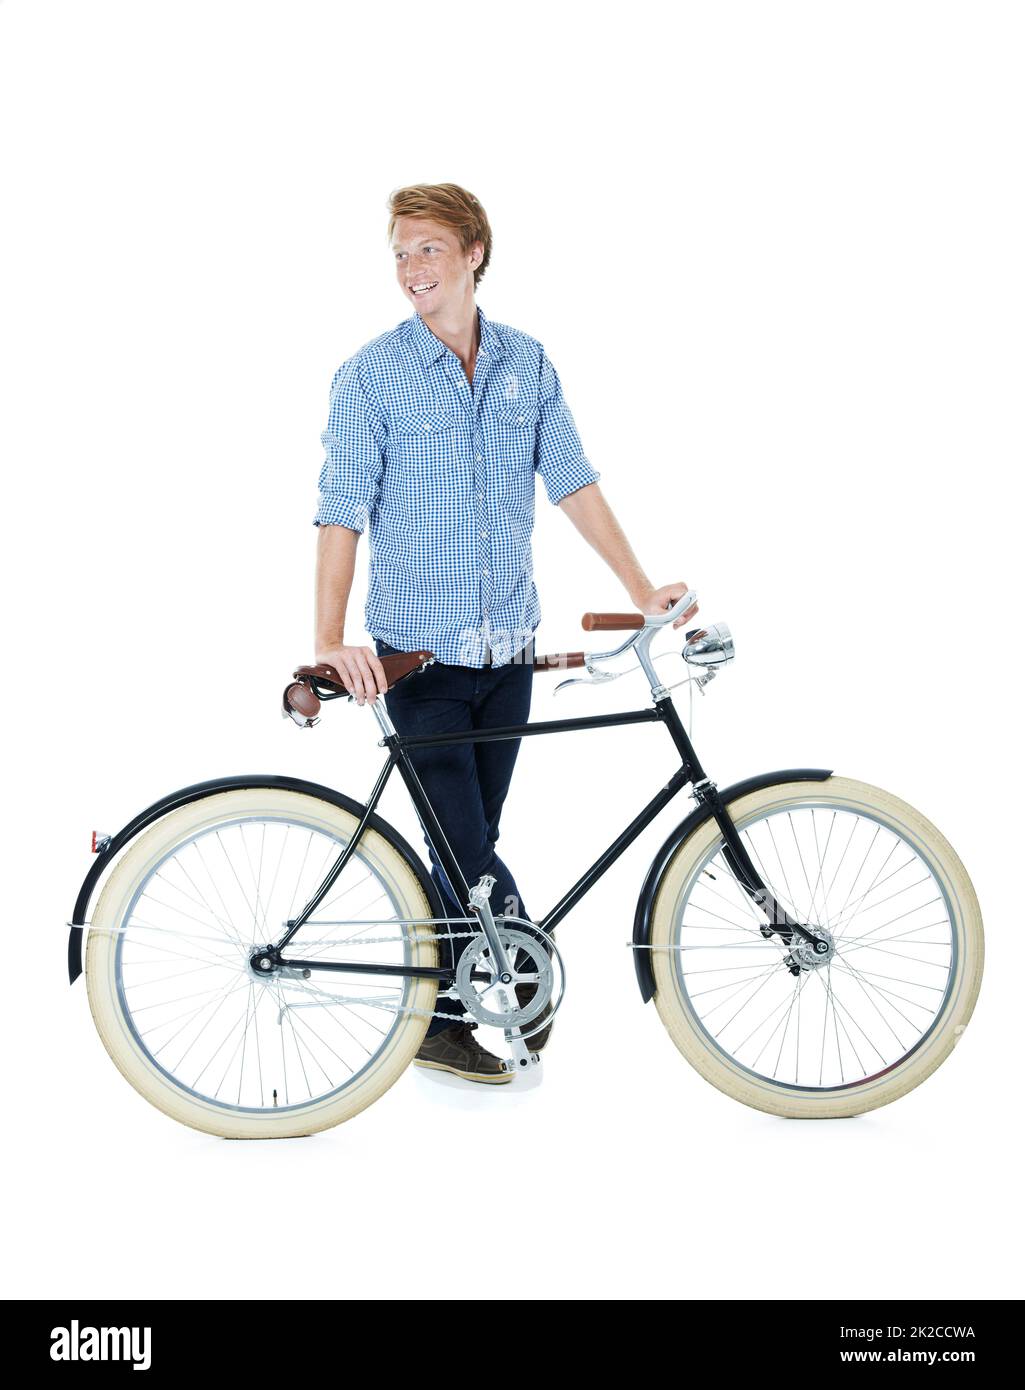 I take things slow. A handsome young red-headed man standing next to an old-fashioned bicycle. Stock Photo